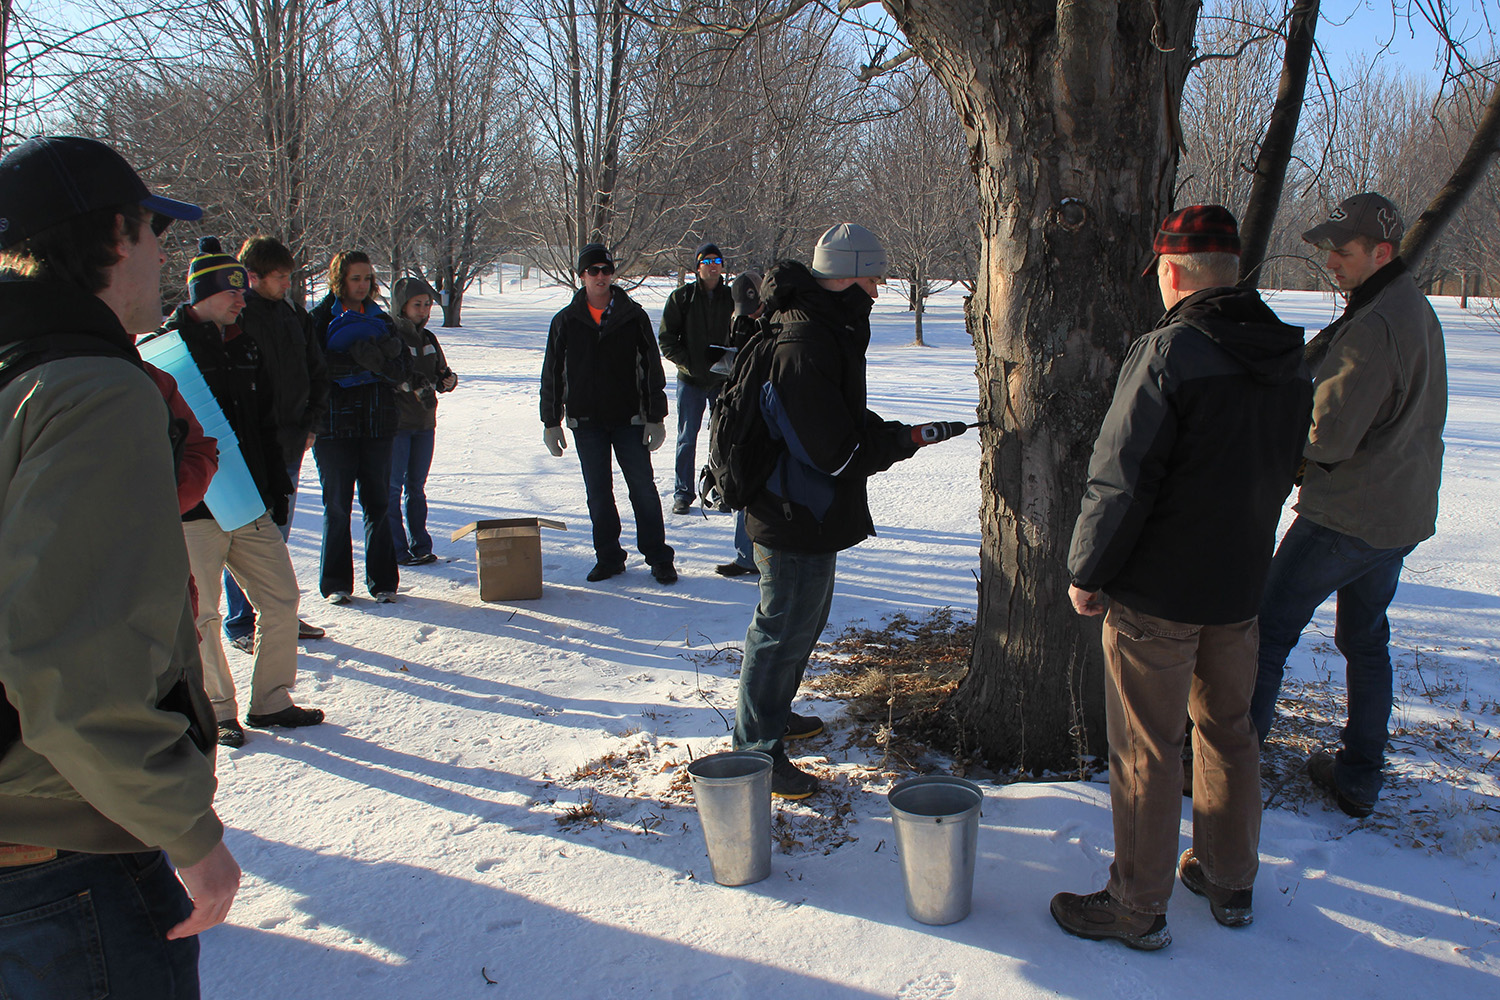 group of people gathered around a tapped silver maple tree